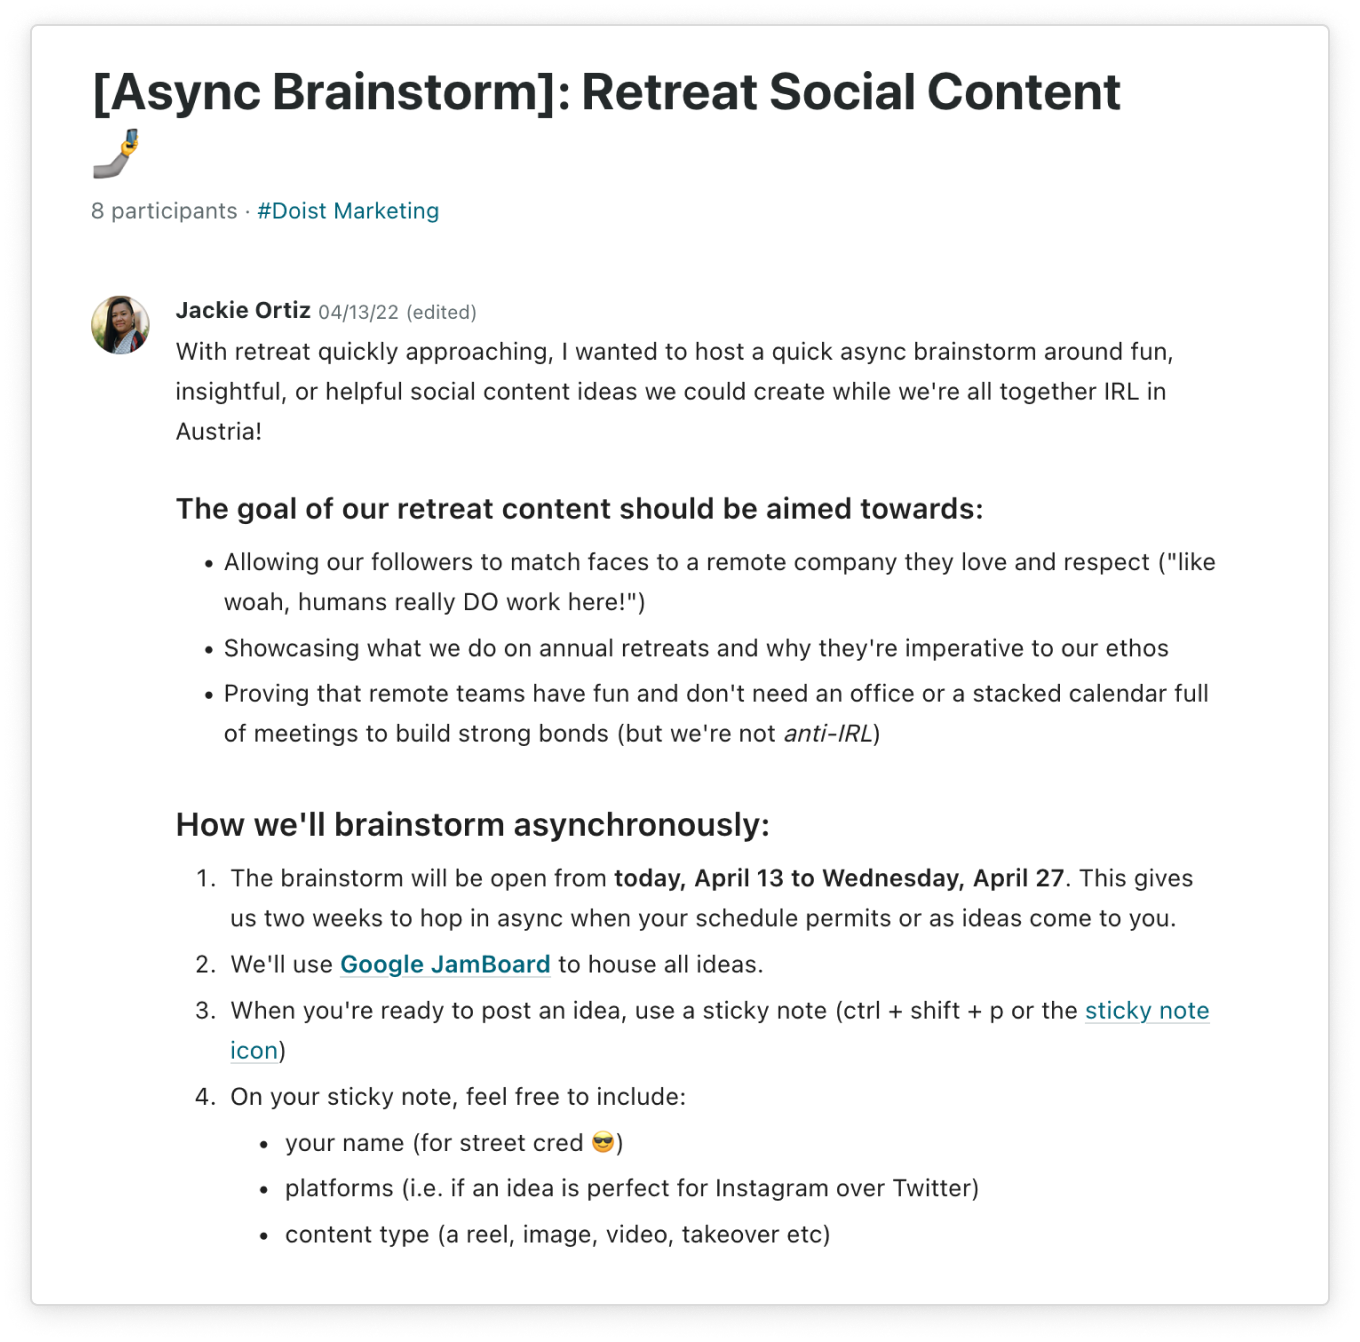 Twist thread in the #Doist Marketing channel including 8 participants titled "[Async Brainstorm] Retreat Social Content"